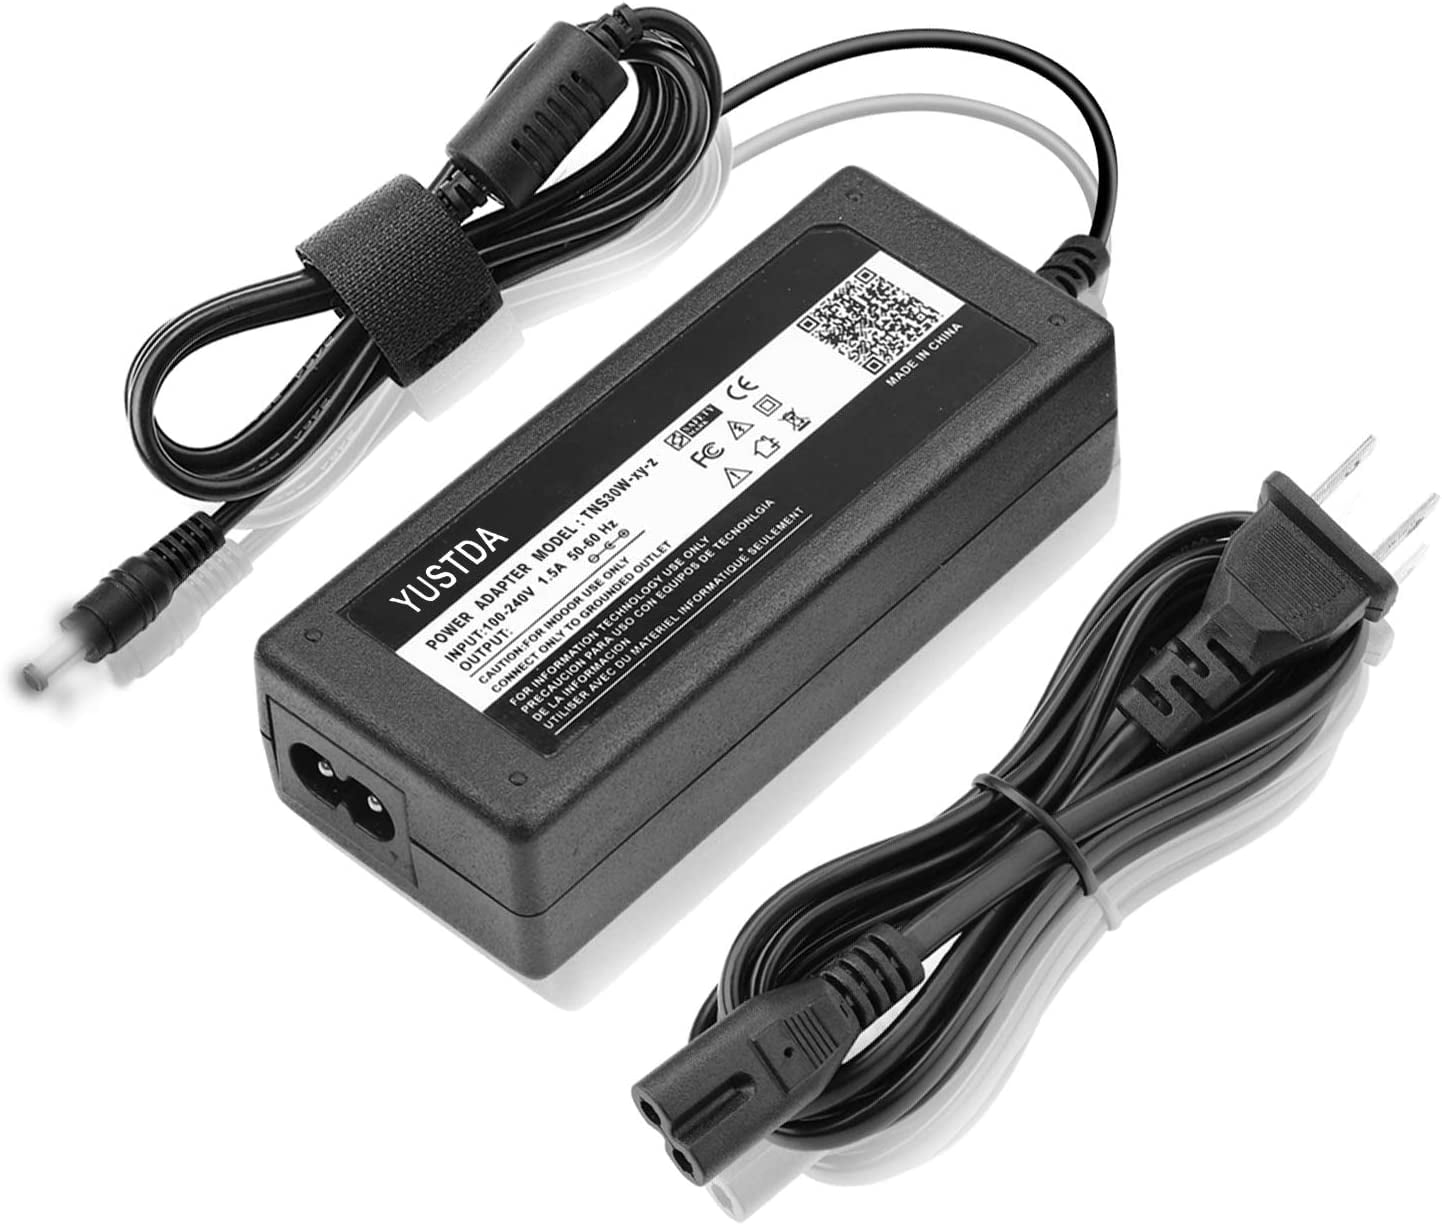 Yustda 2-Prong 24V AC/DC Adapter Replacement for Miko Y2 YII MMF